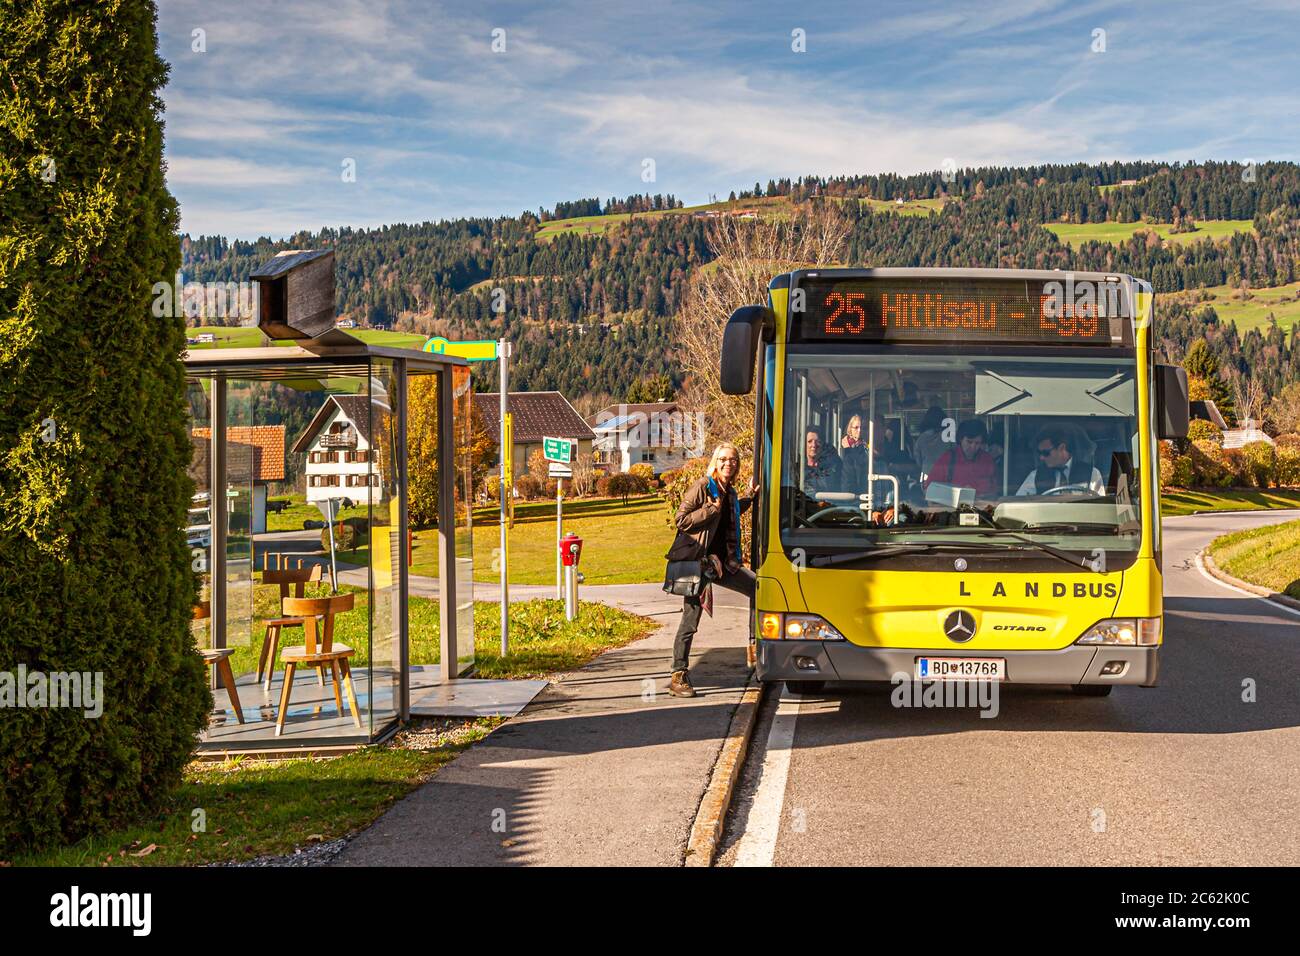 BUS: STOP Zwing, designed by Smiljan Radic, Chile. Krumbach bus shelters designed by architects from all around the world, drawing attention to everyday mobility service. Bregenzerwald Austria. BUS:STOP Krumbach, Vorarlberg, Austria Stock Photo